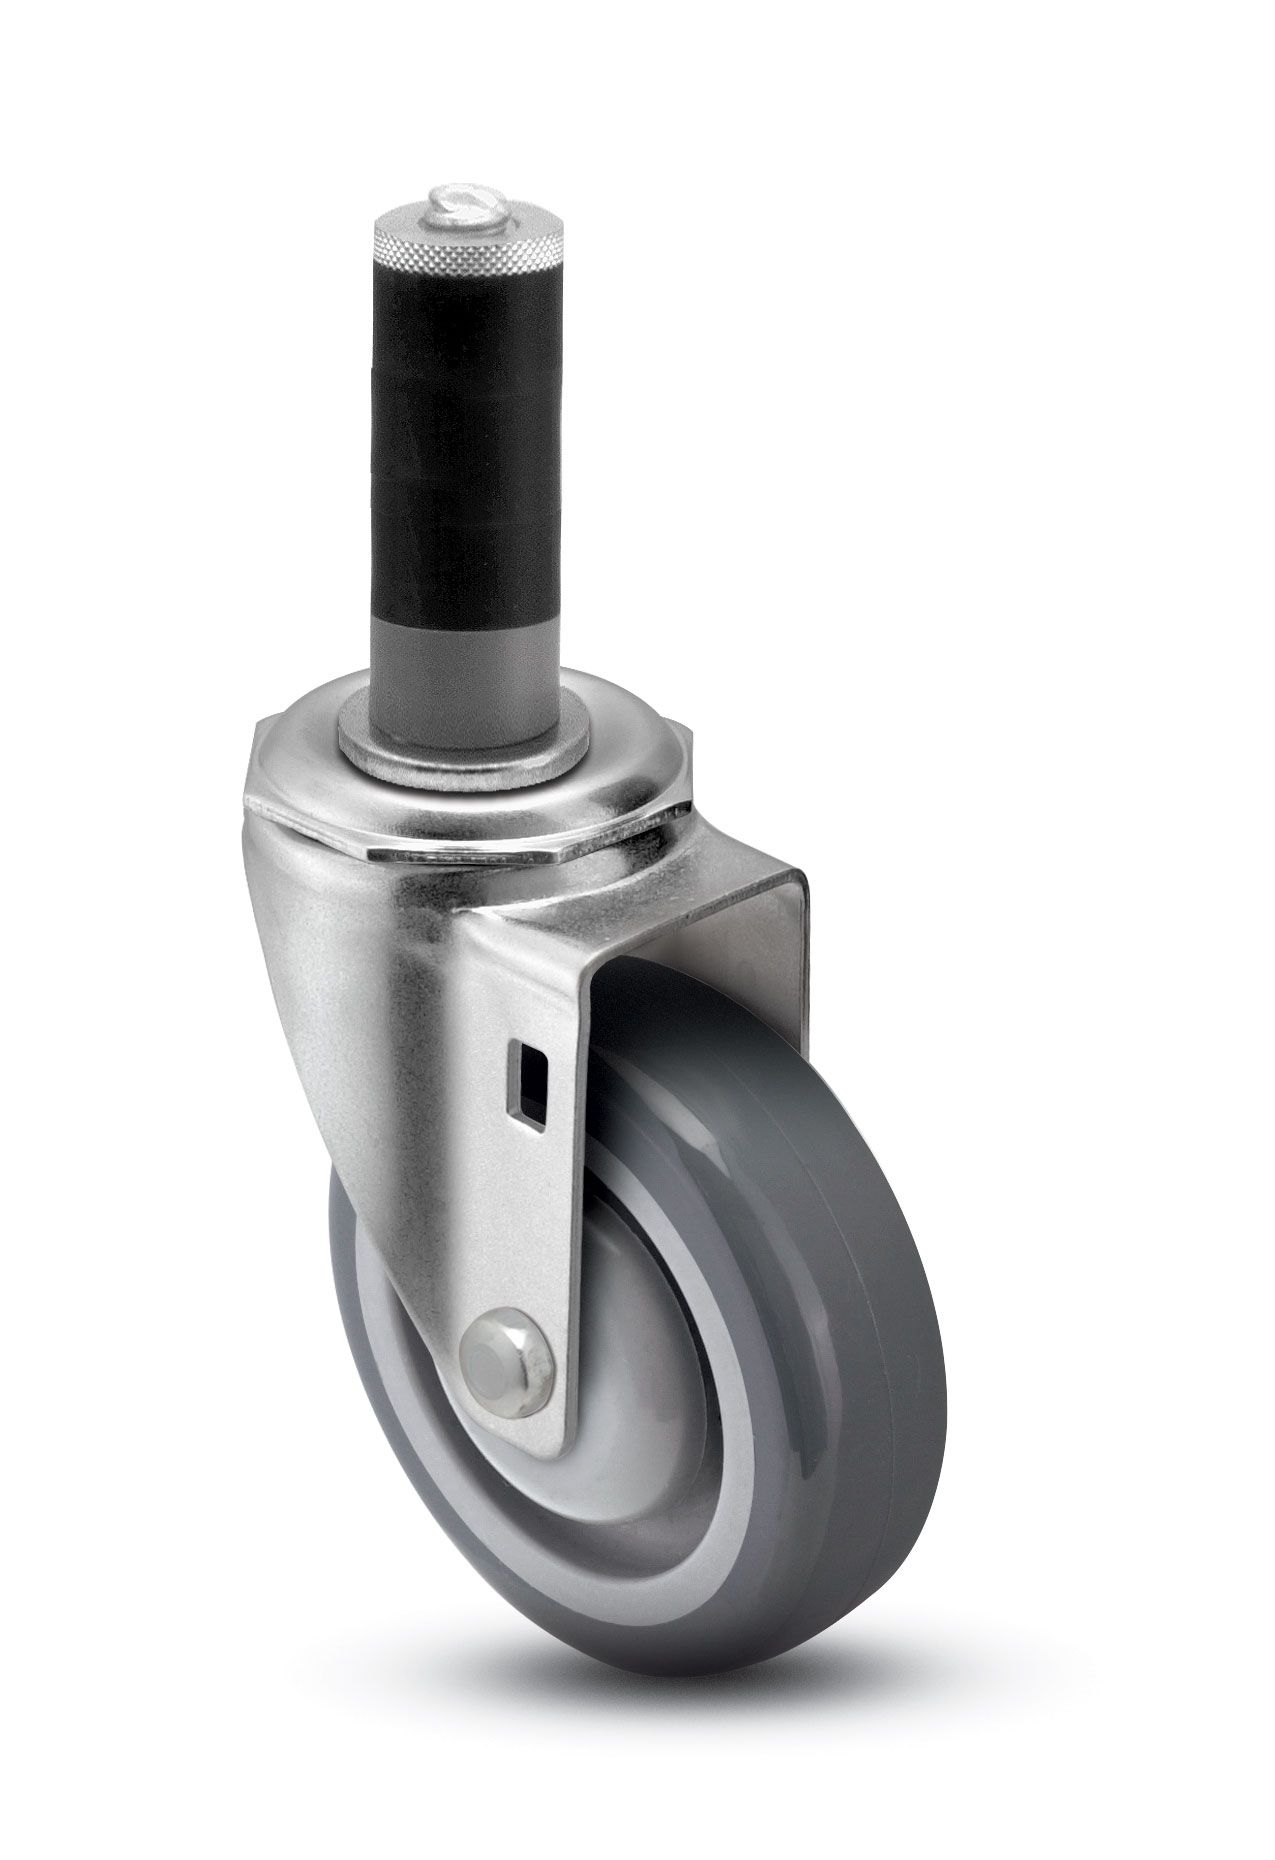 Caster; Swivel; 5" x 1-1/4"; PolyU on PolyO (Gray); Expandable Adapter (1-3/8" - 1-7/16" ID tubing); Zinc; Precision Ball Brng; 300#; Total Lock; Dust Cover (Item #65050)